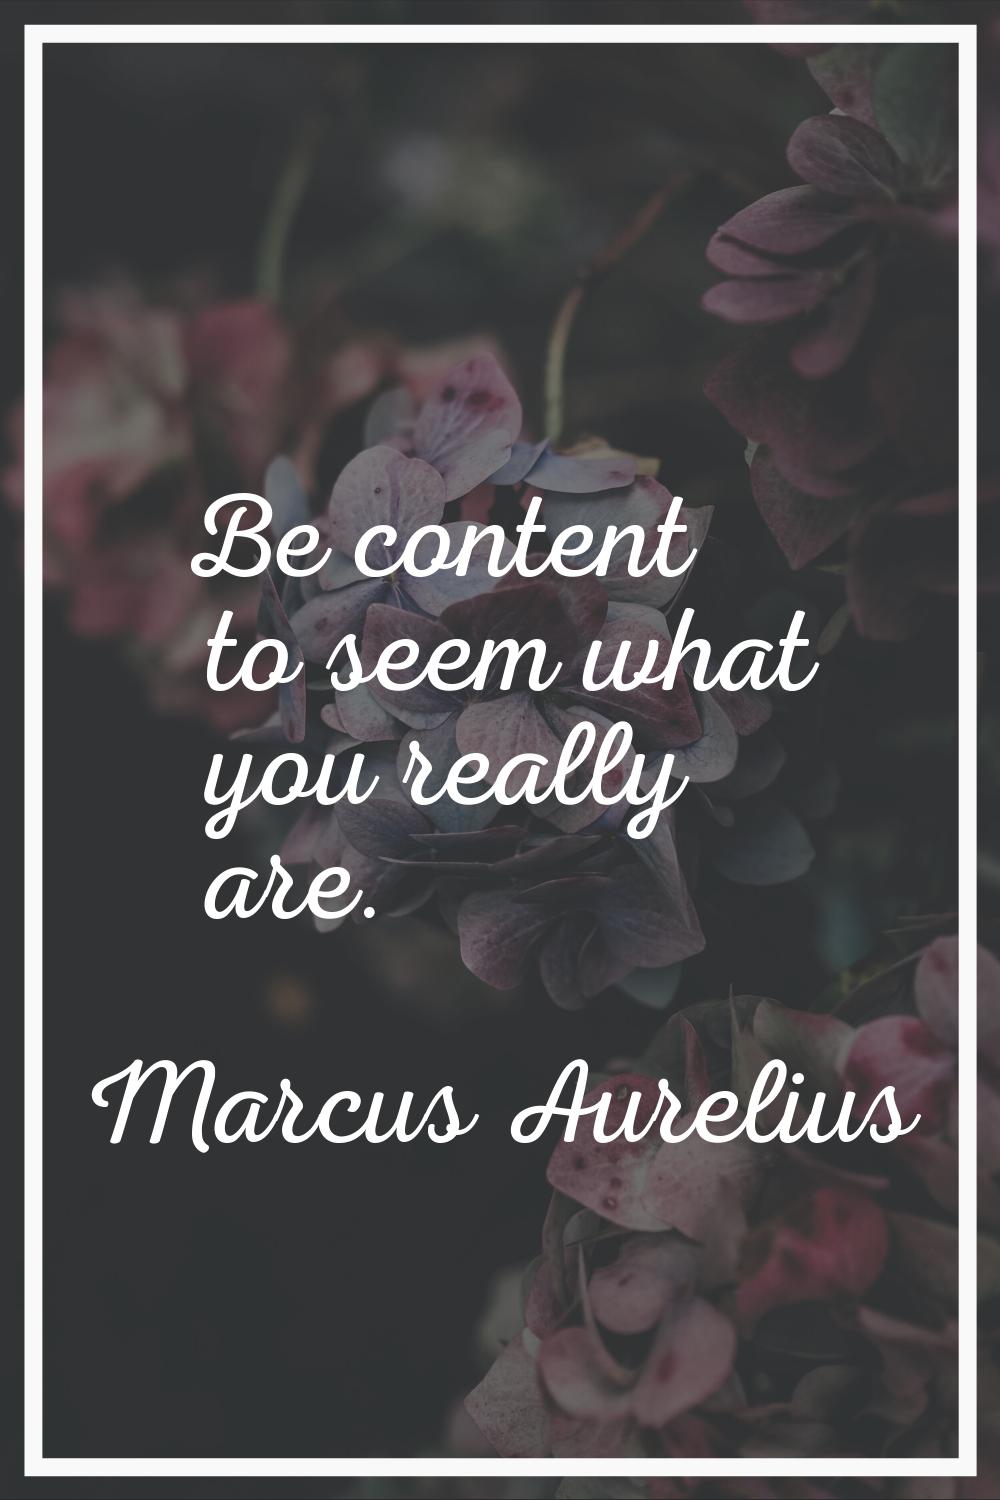 Be content to seem what you really are.